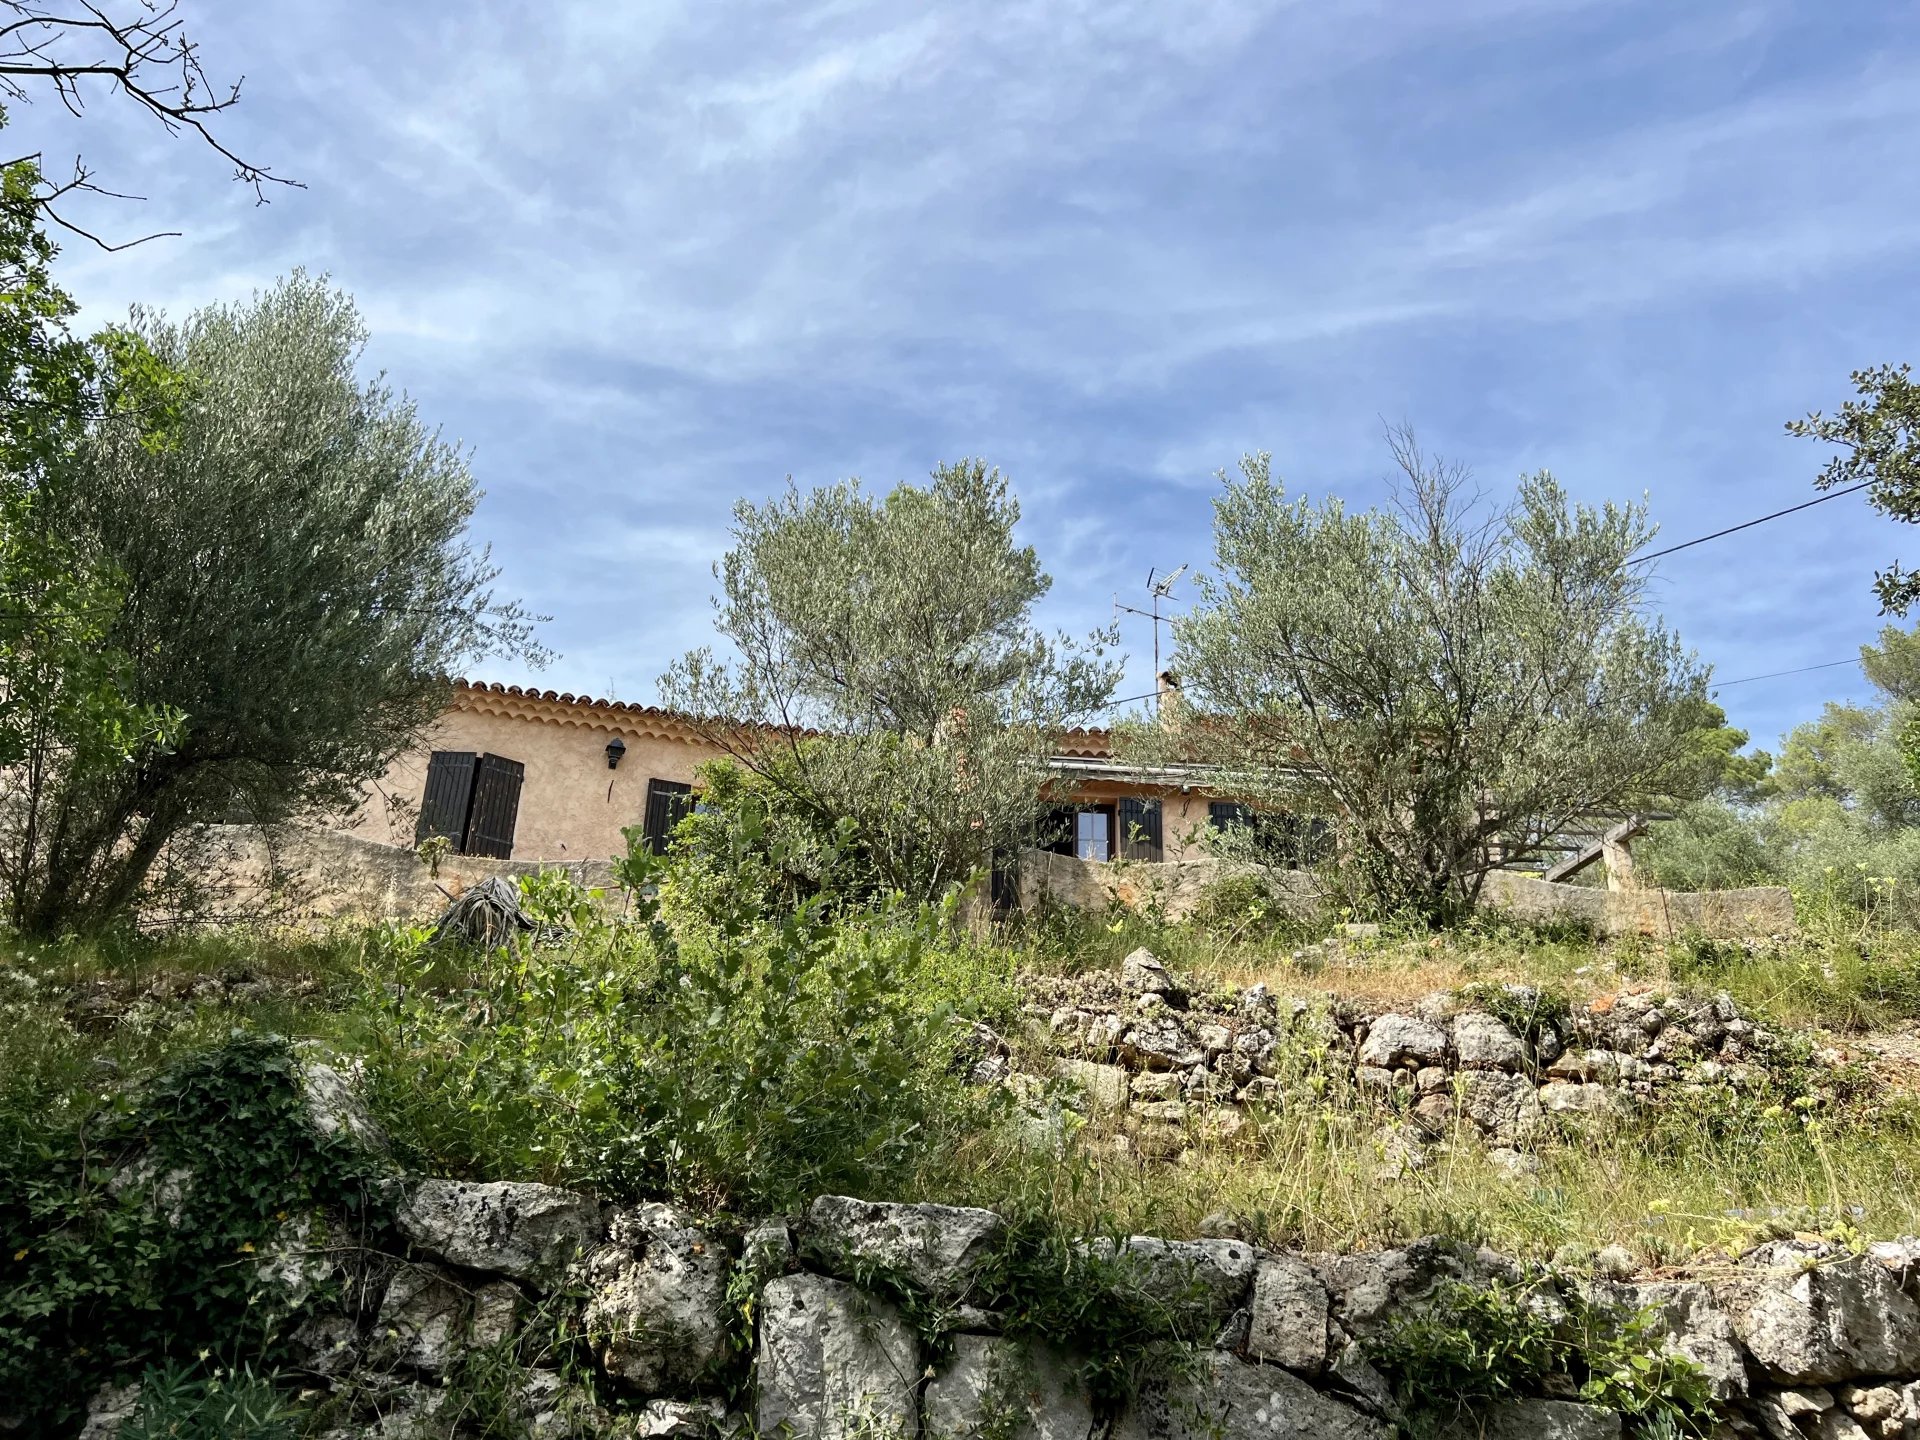 Panoramic view, quiet are, walking distance from the village